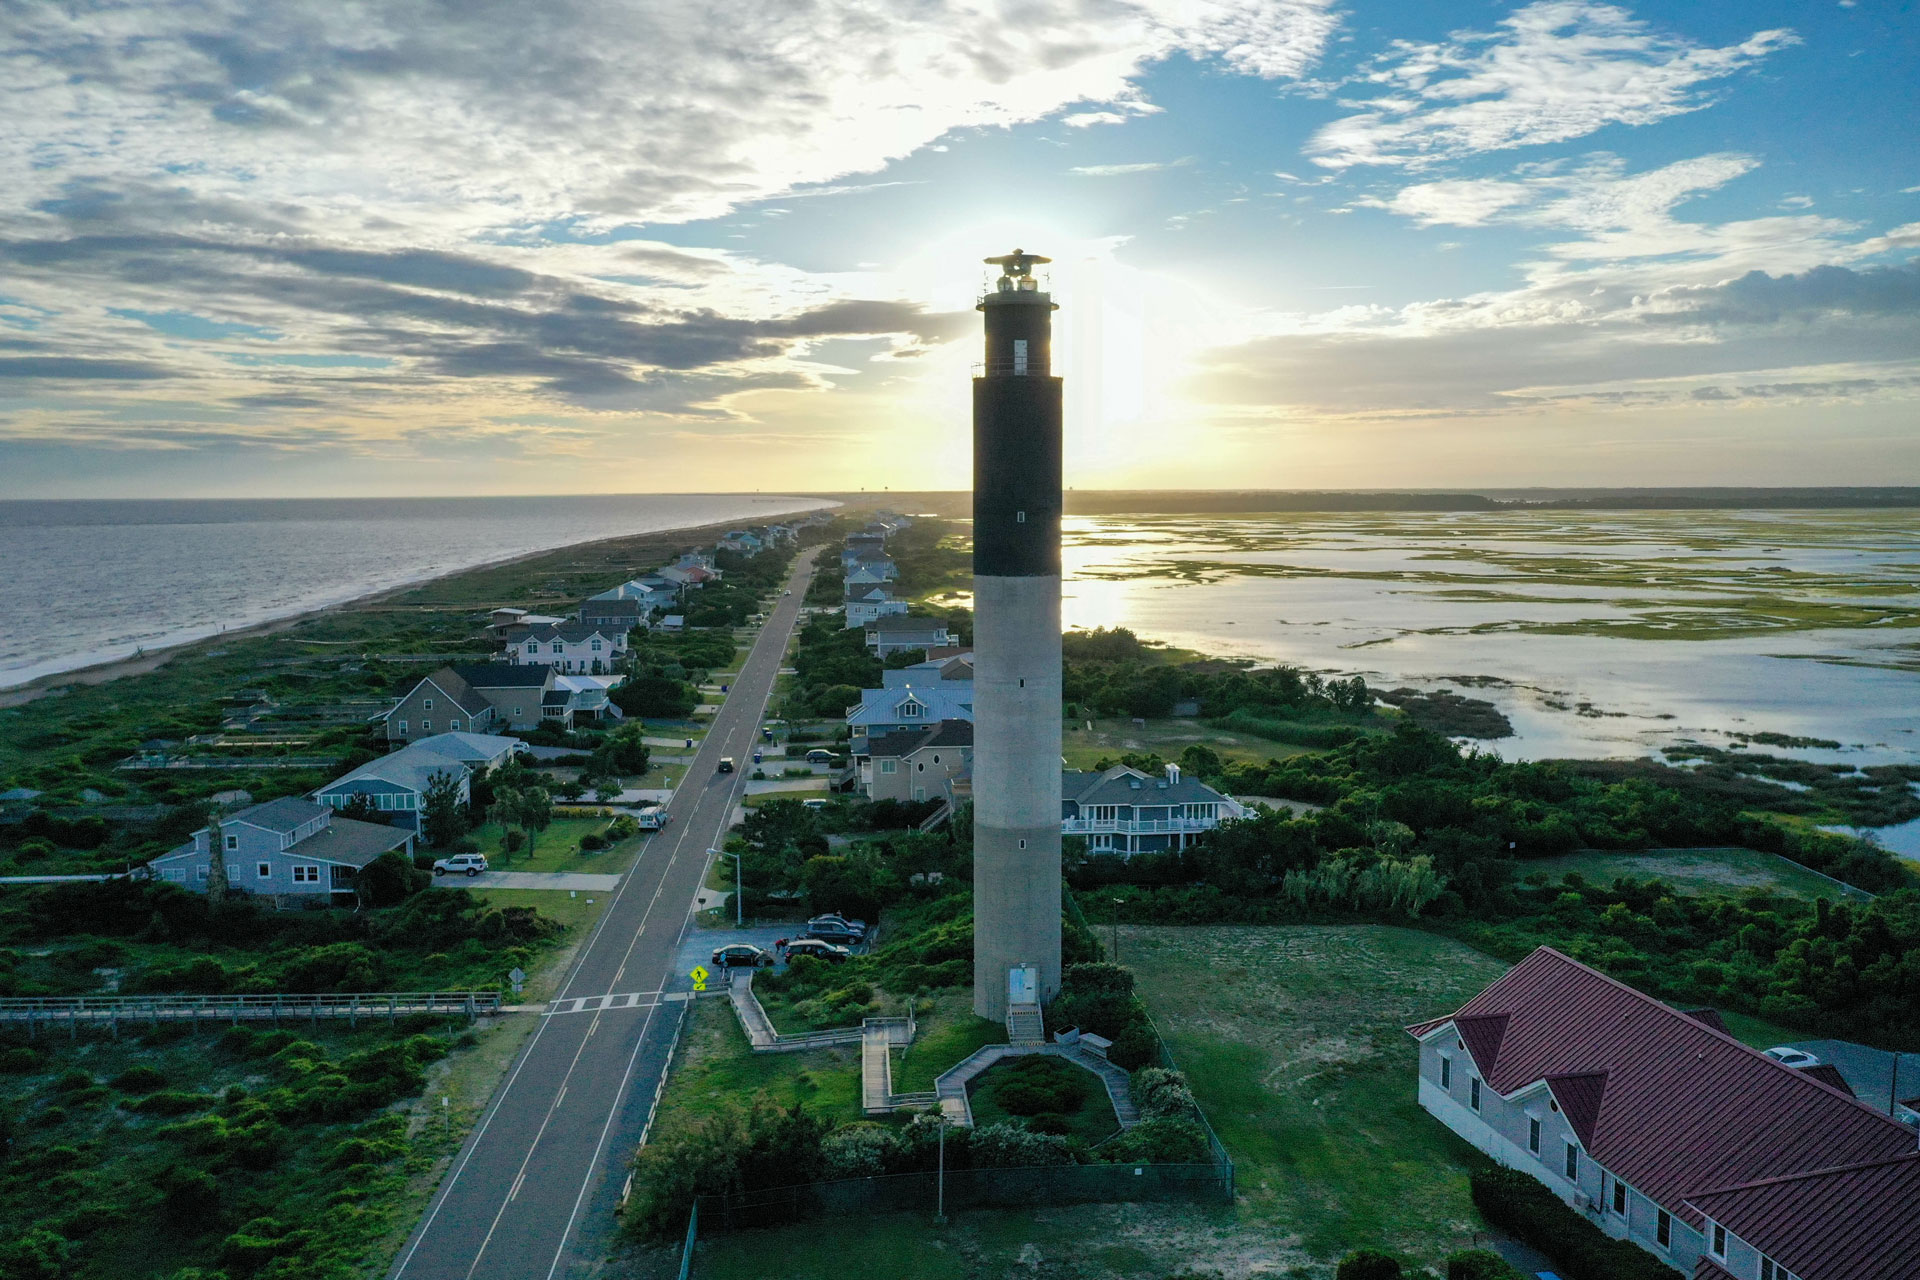 The sun is setting behind the Oak Island, NC lighthouse, surrounded by the ocean and waterway on a partly cloudy day